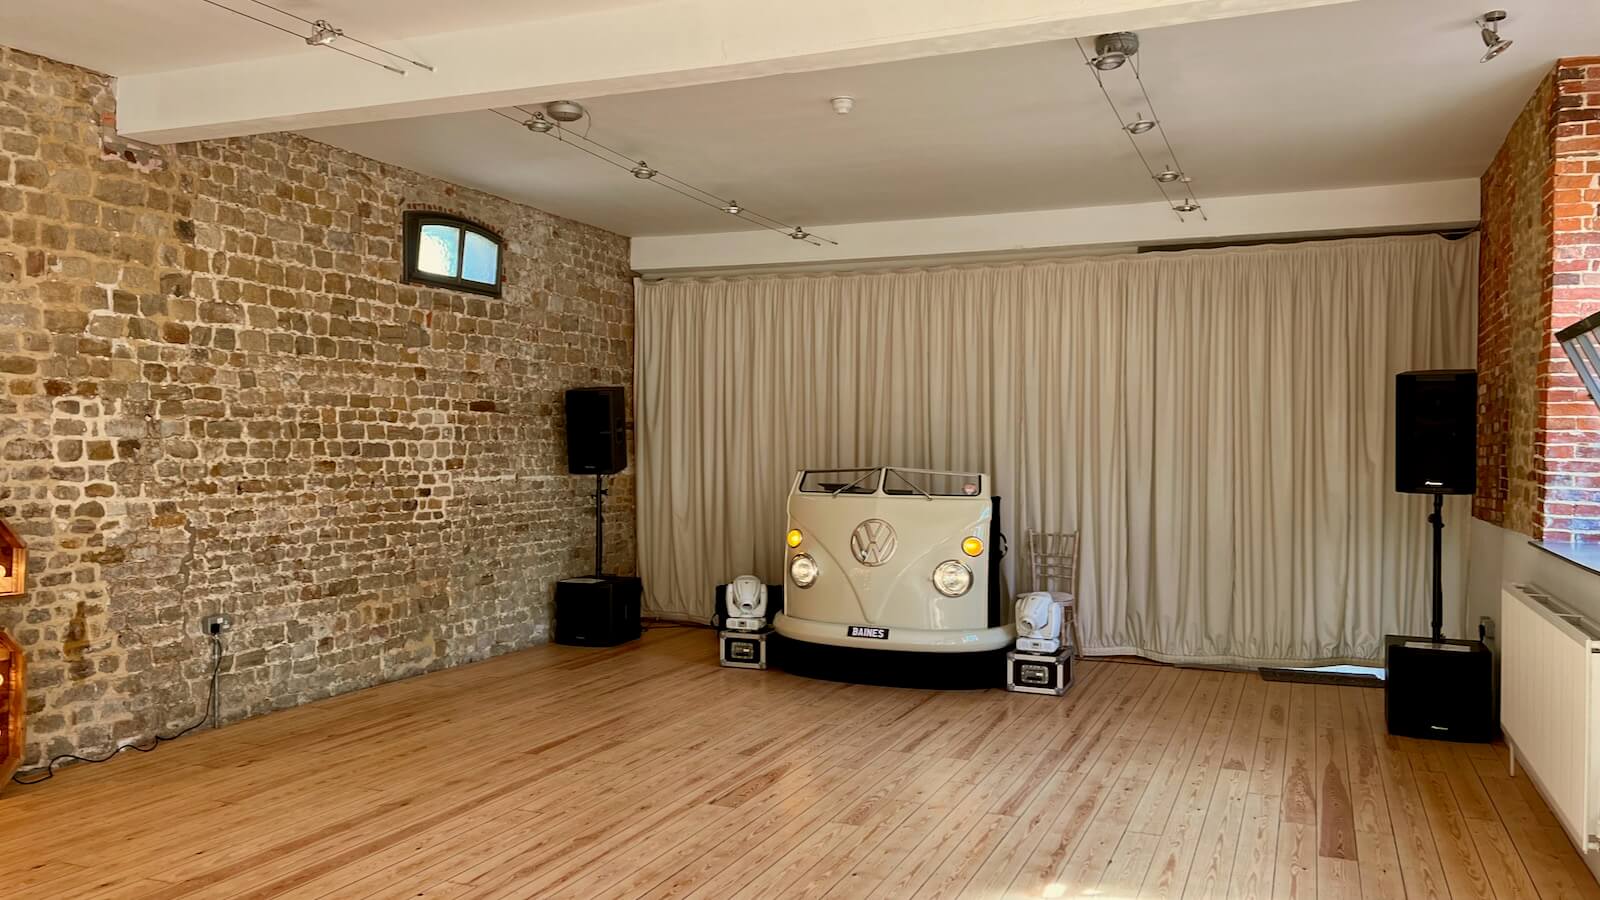 Brian Mole VW DJ booth at Cowdray Walled Garden, for Kelly and Wayne's wedding